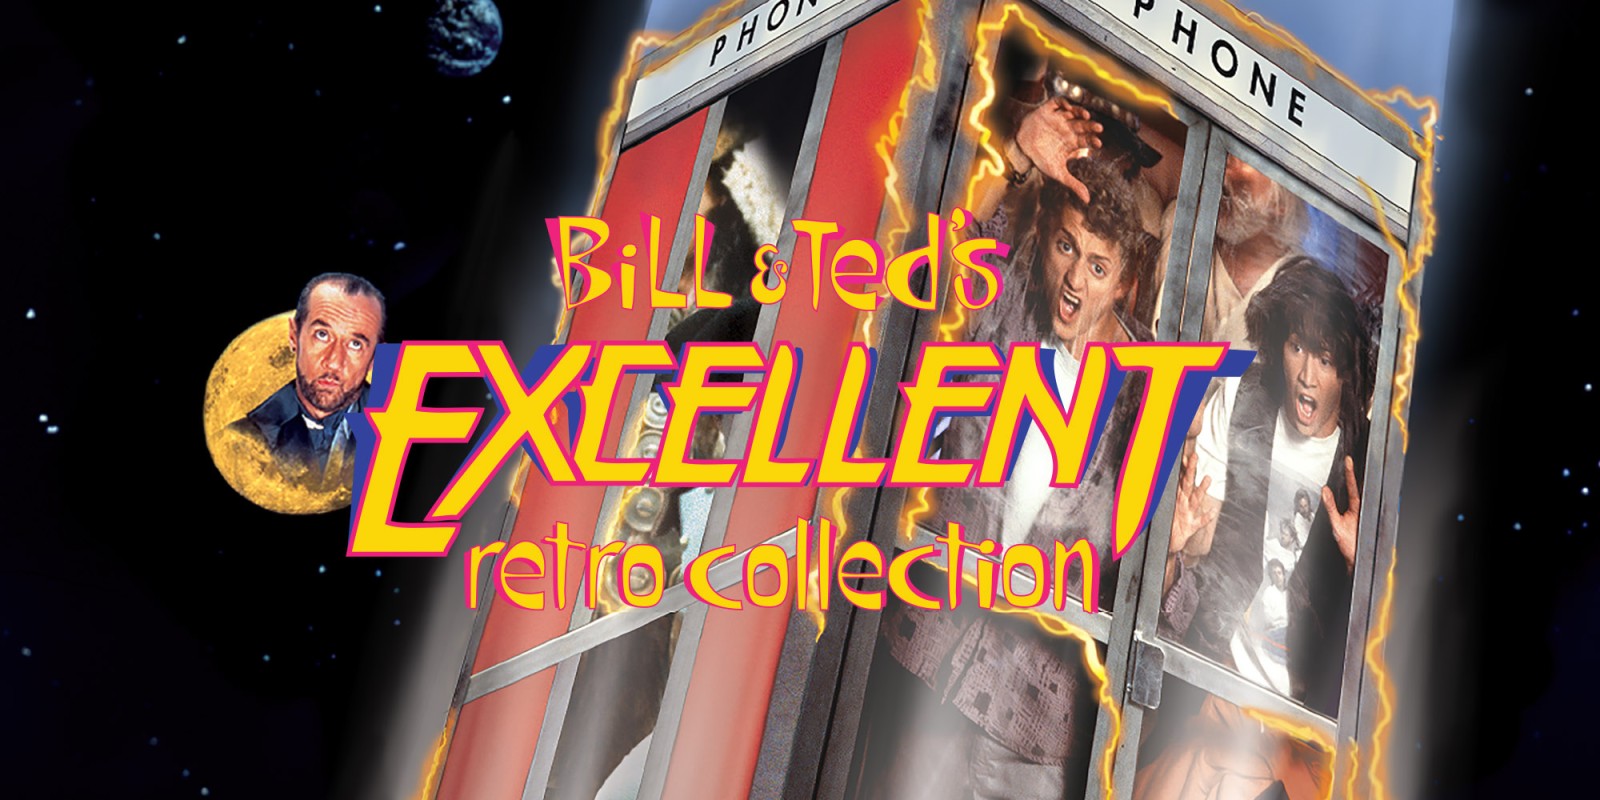 Bill-and-Teds-Excellent-Retro-Collection